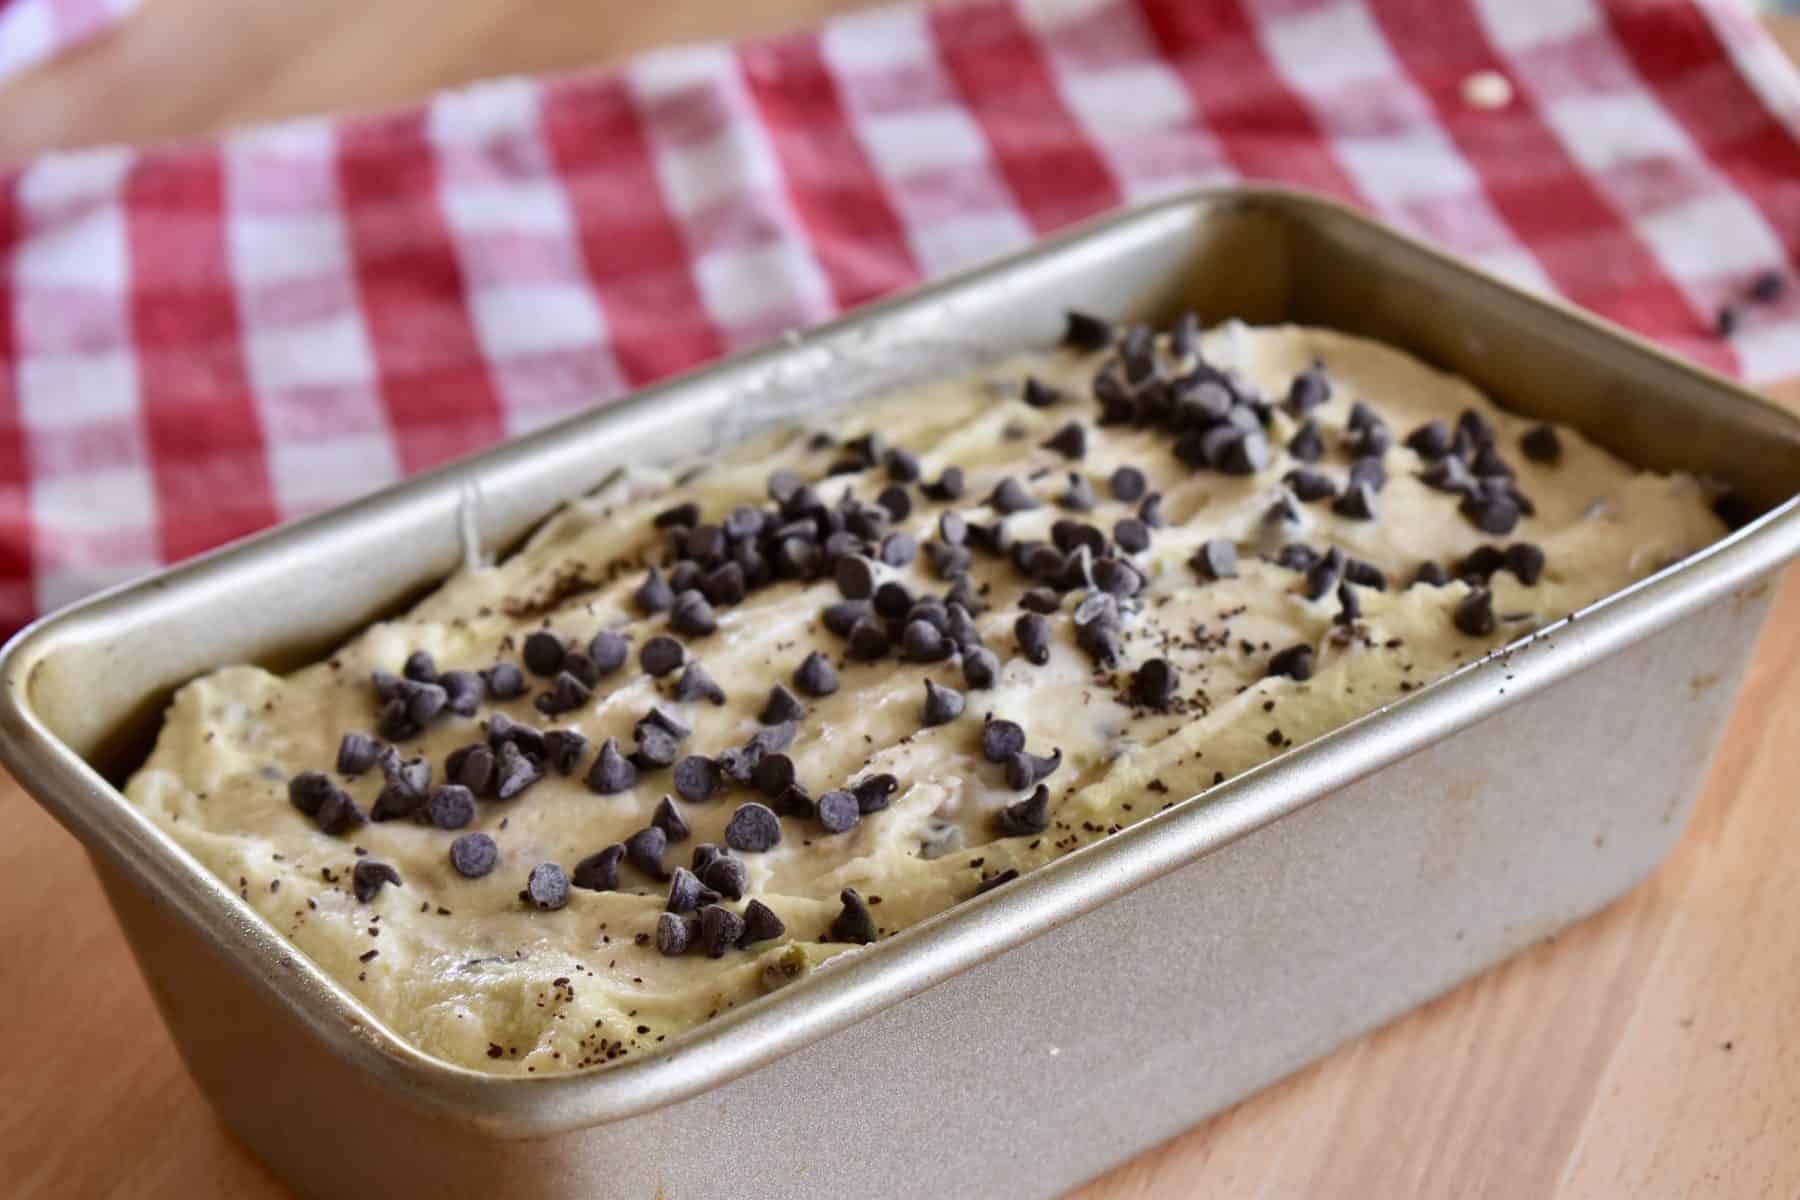 Batter poured into loaf pan with chocolate chips sprinkled on top. 